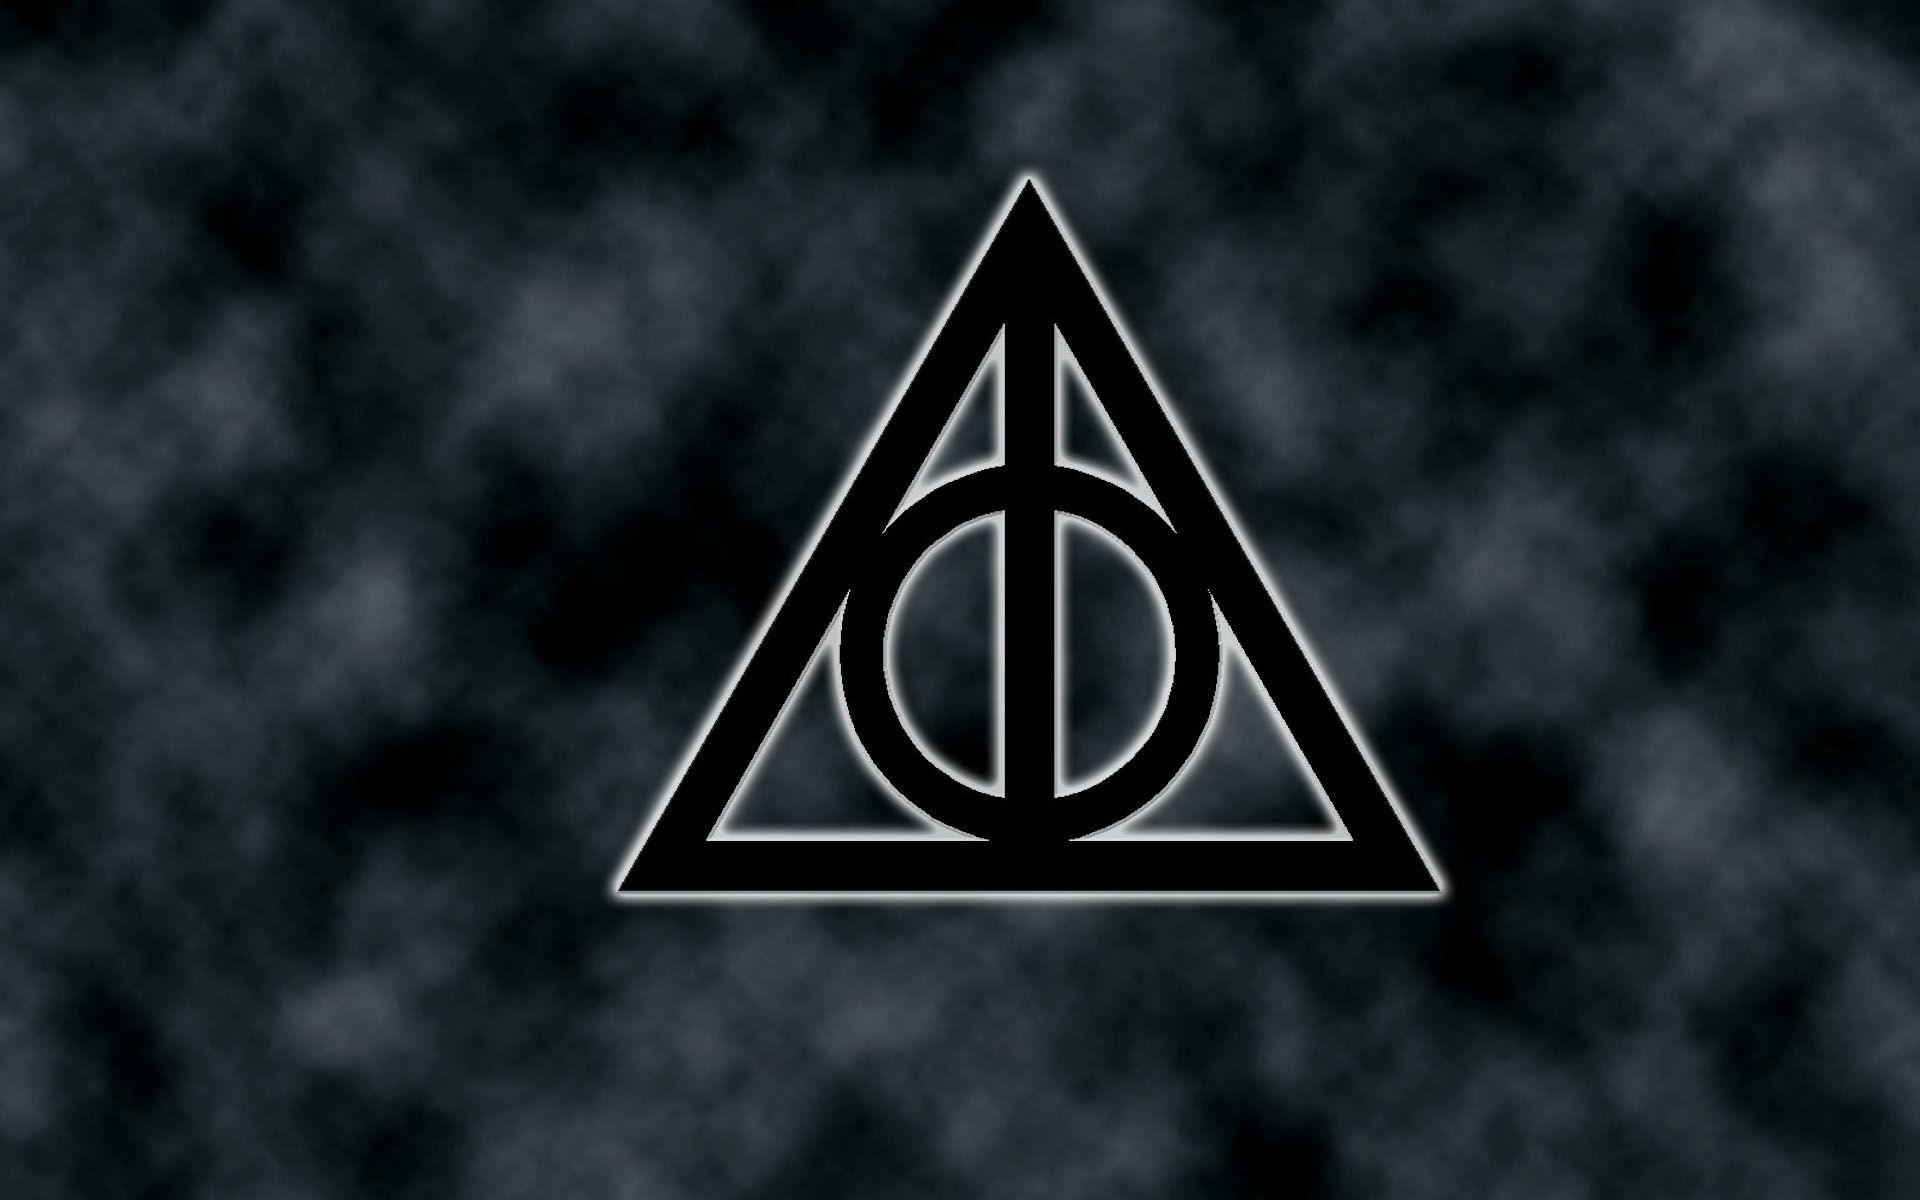 1. "Always" with a small Deathly Hallows symbol - wide 6